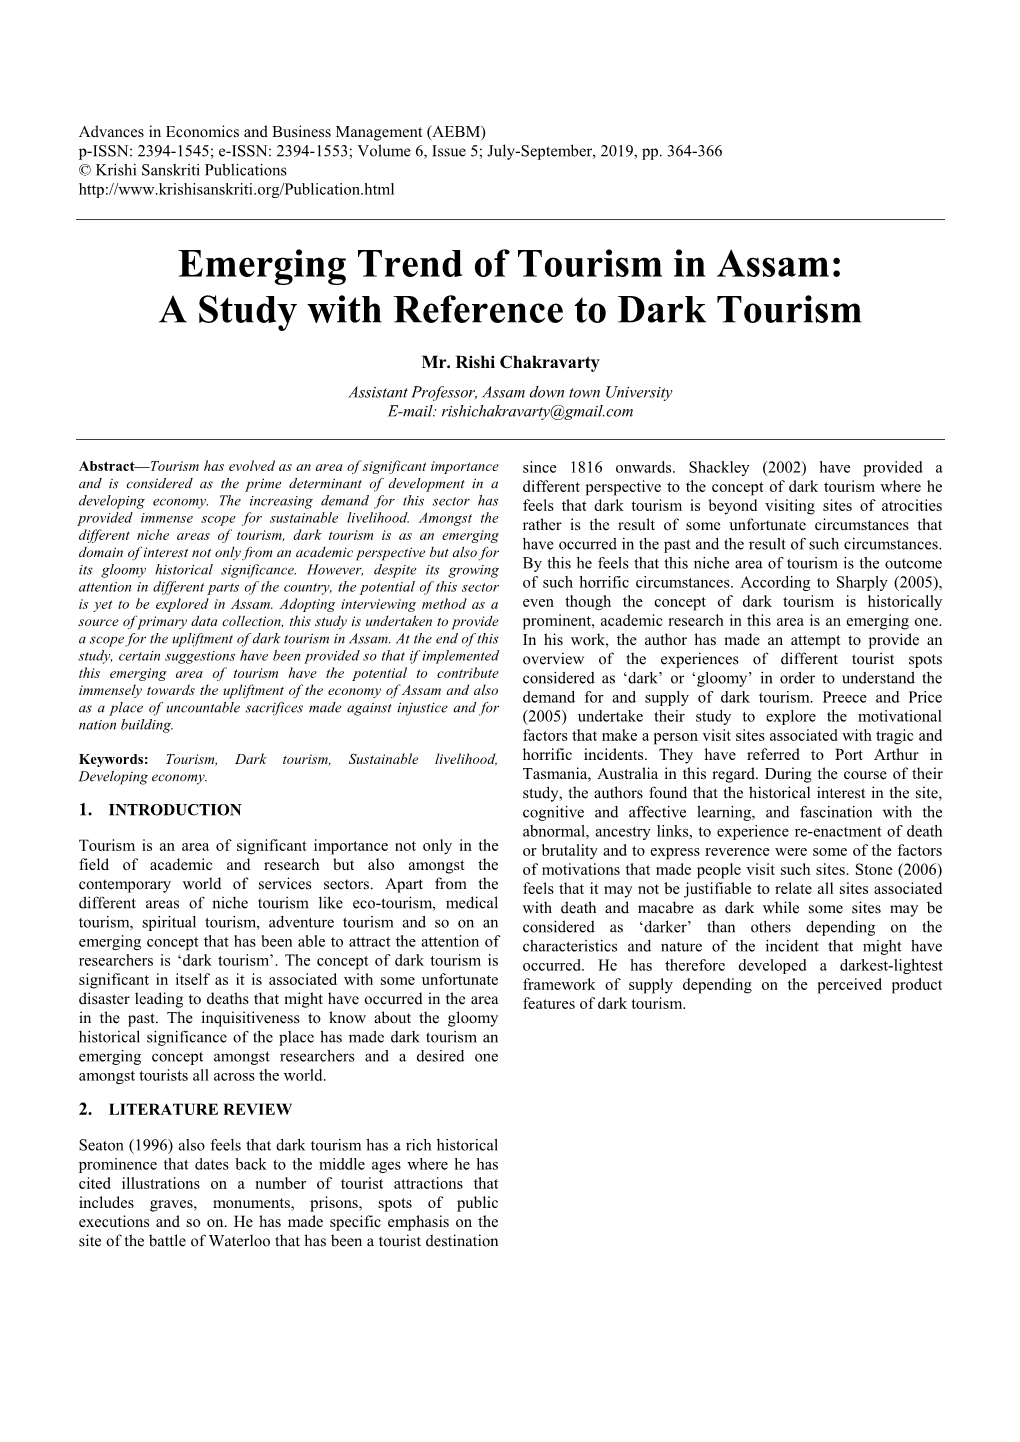 Emerging Trend of Tourism in Assam: a Study with Reference to Dark Tourism